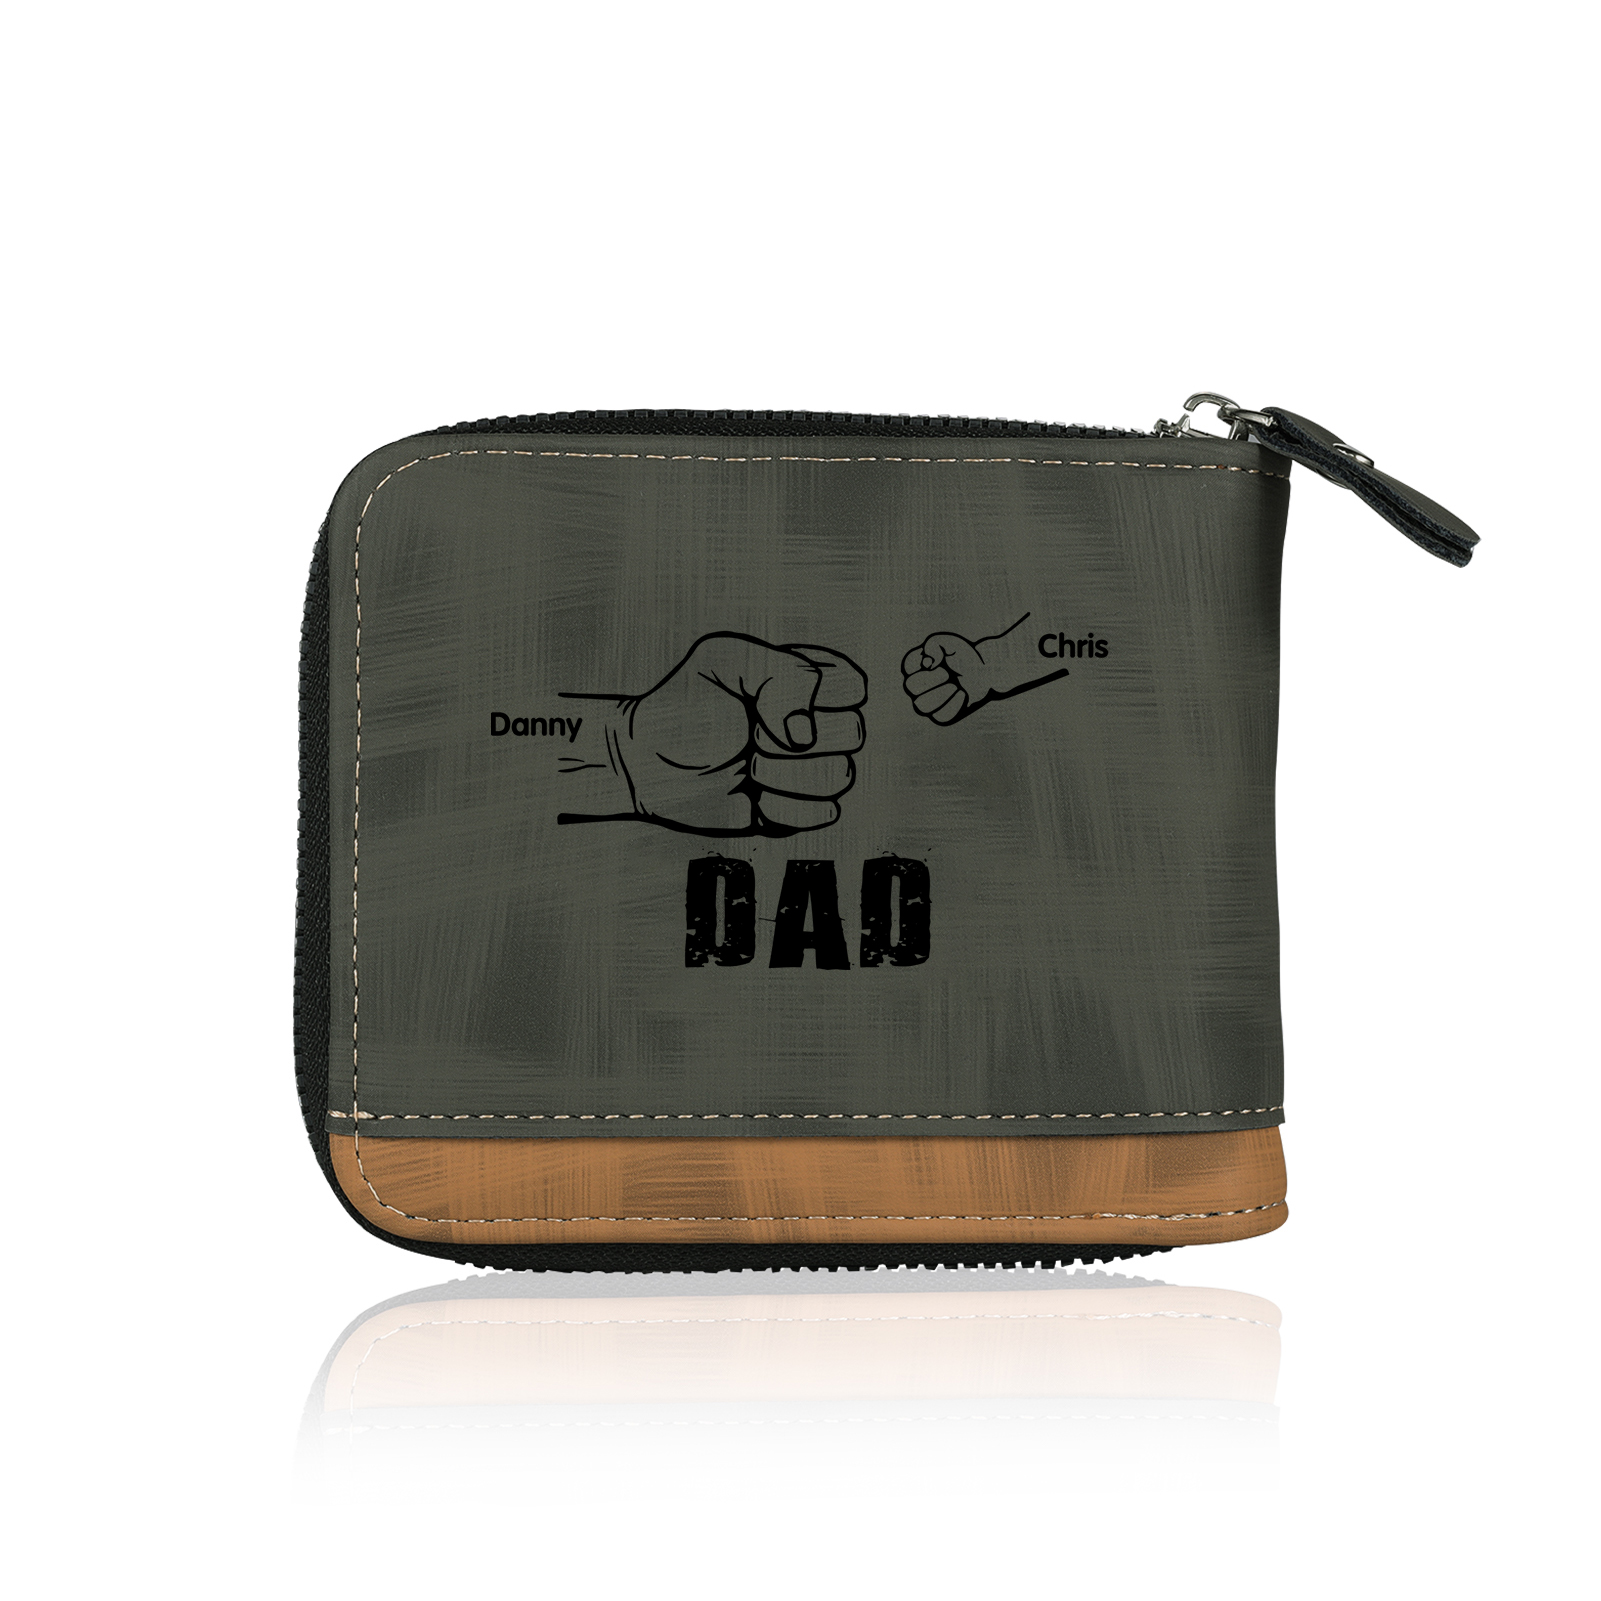 2 Names - Personalized Photo Custom Leather Men's Zipper Wallet as a Father's Day Gift for Dad